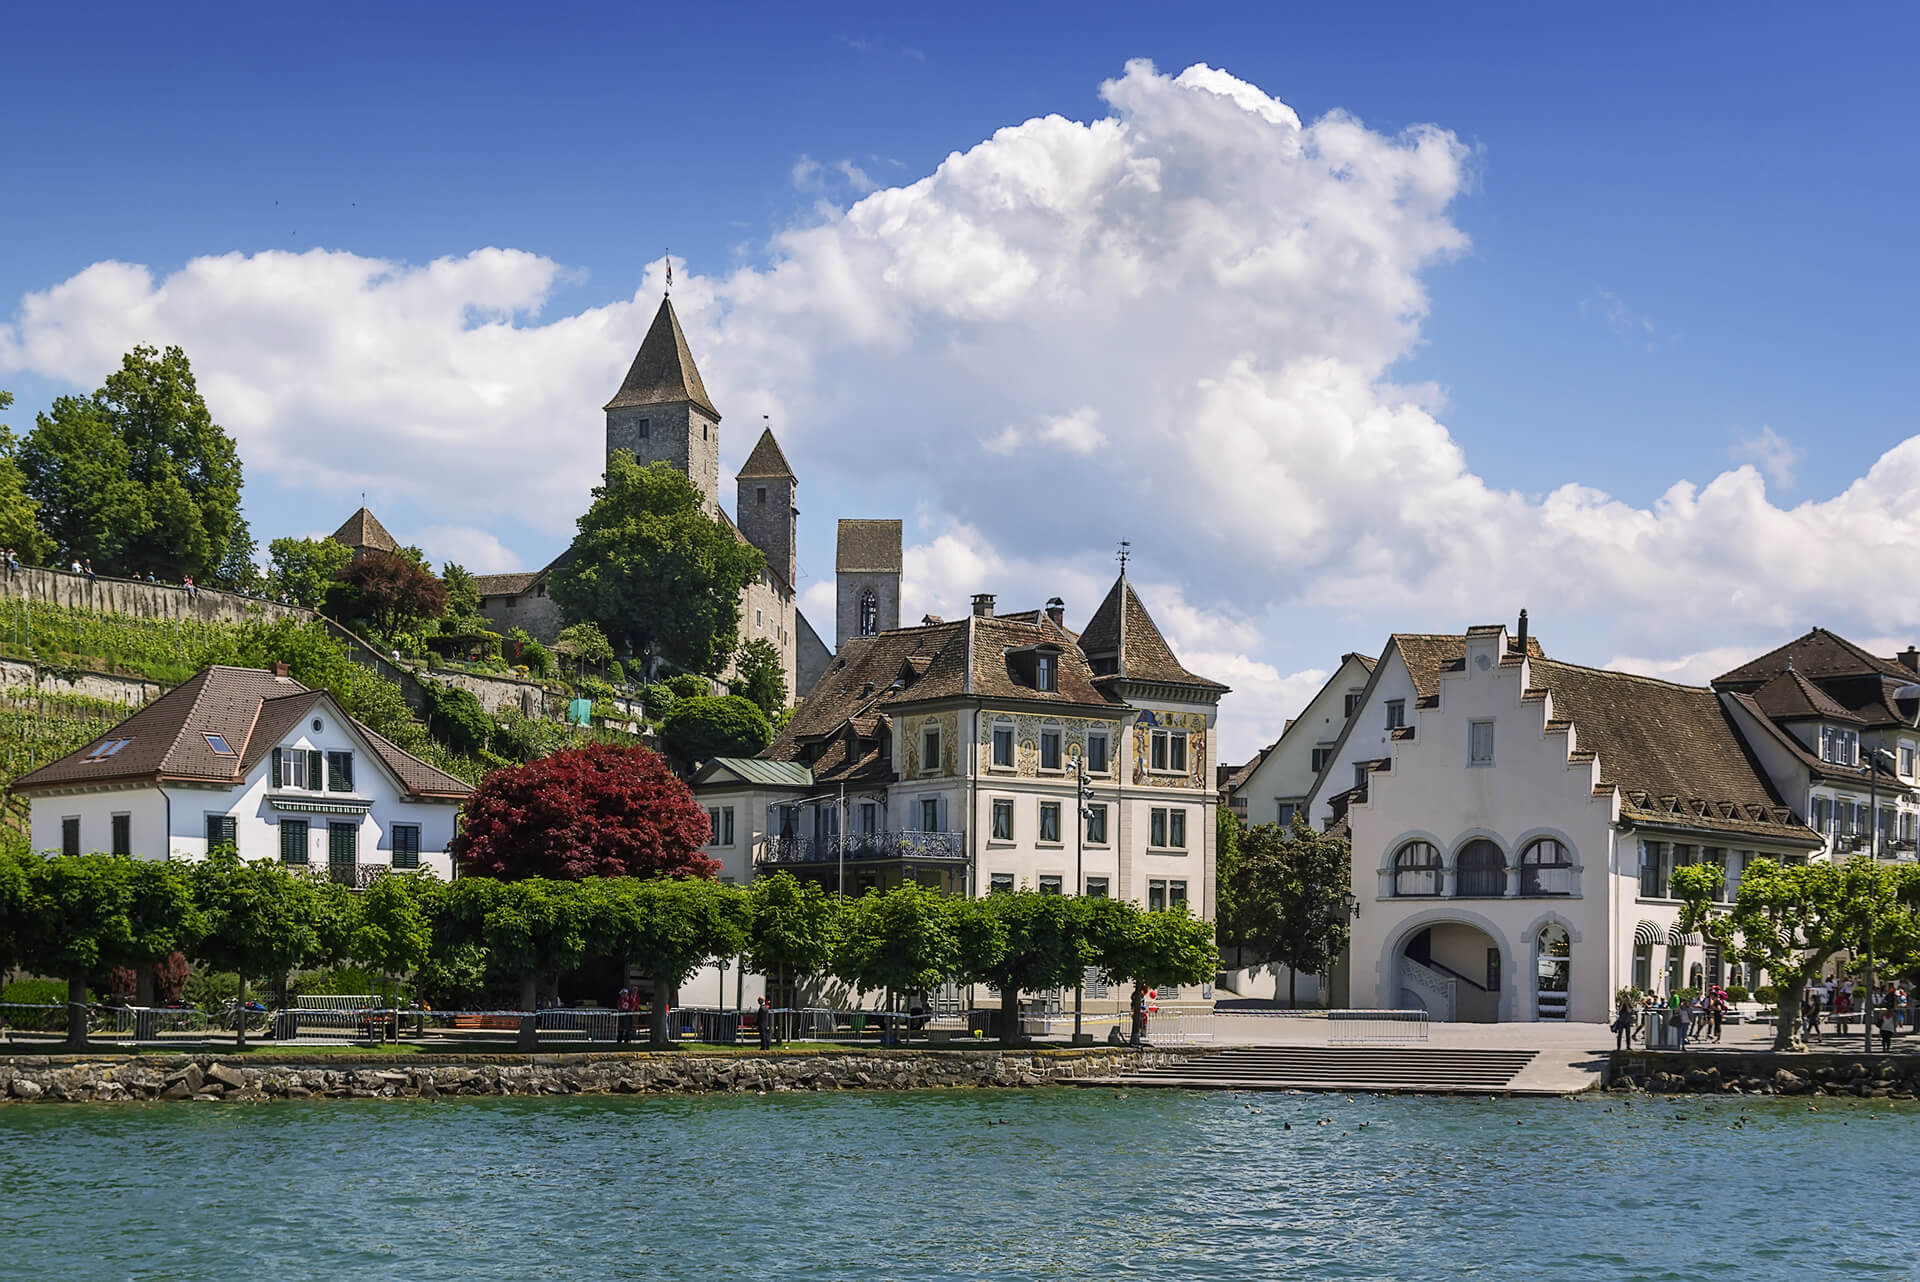 Rapperswil as seen from Lake Zurich